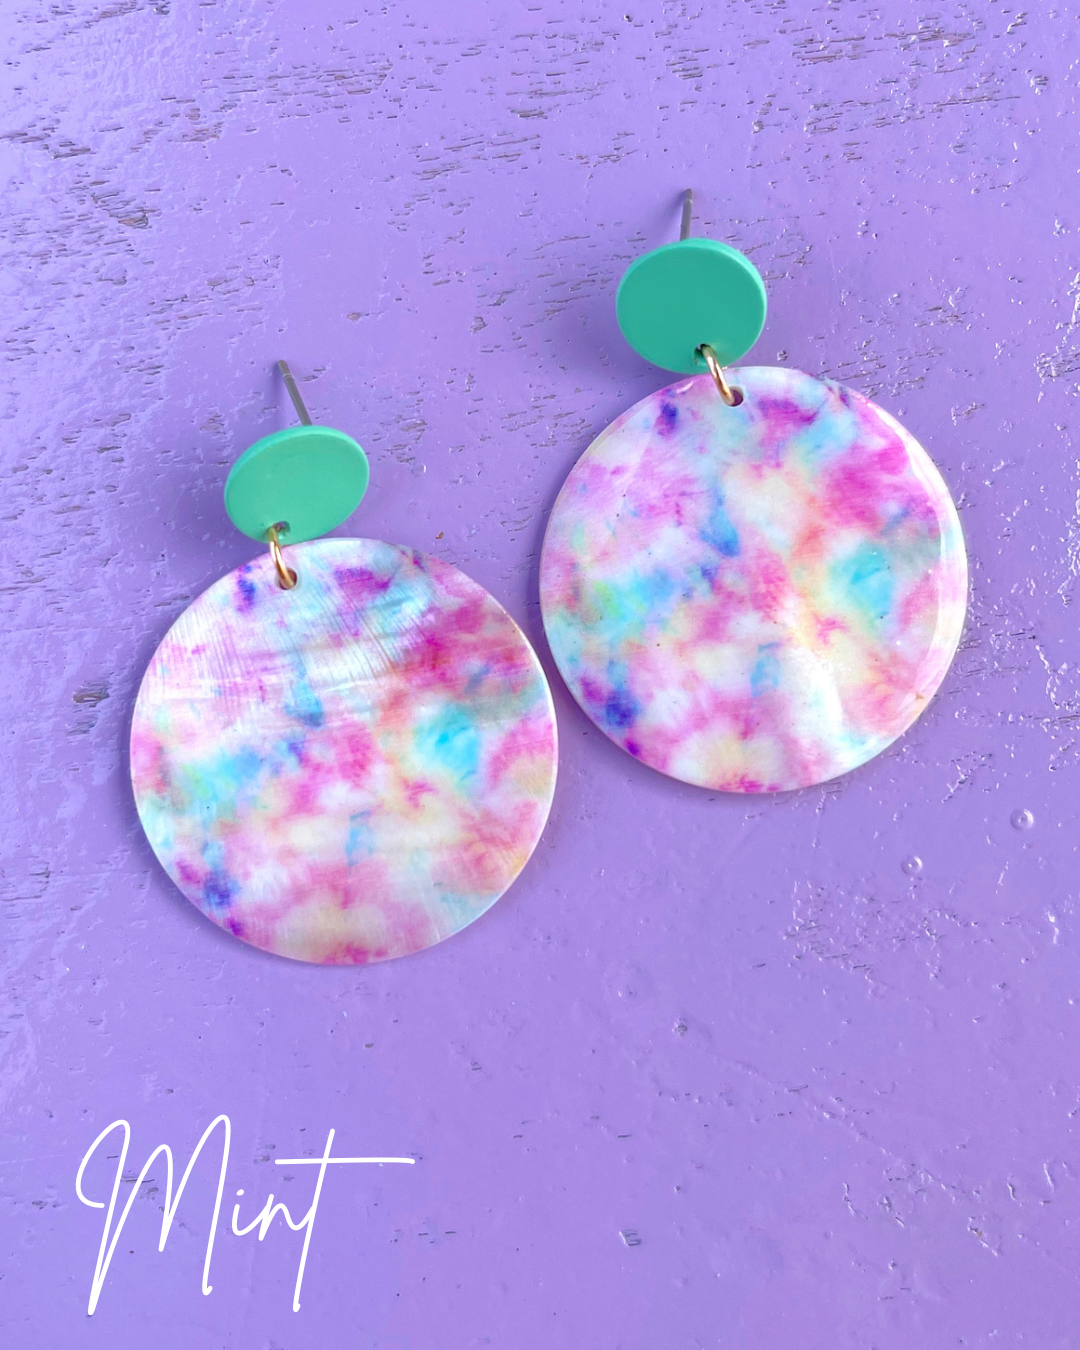 Shells by the Seashore Earrings-Earrings-Golden Stella-The Village Shoppe, Women’s Fashion Boutique, Shop Online and In Store - Located in Muscle Shoals, AL.